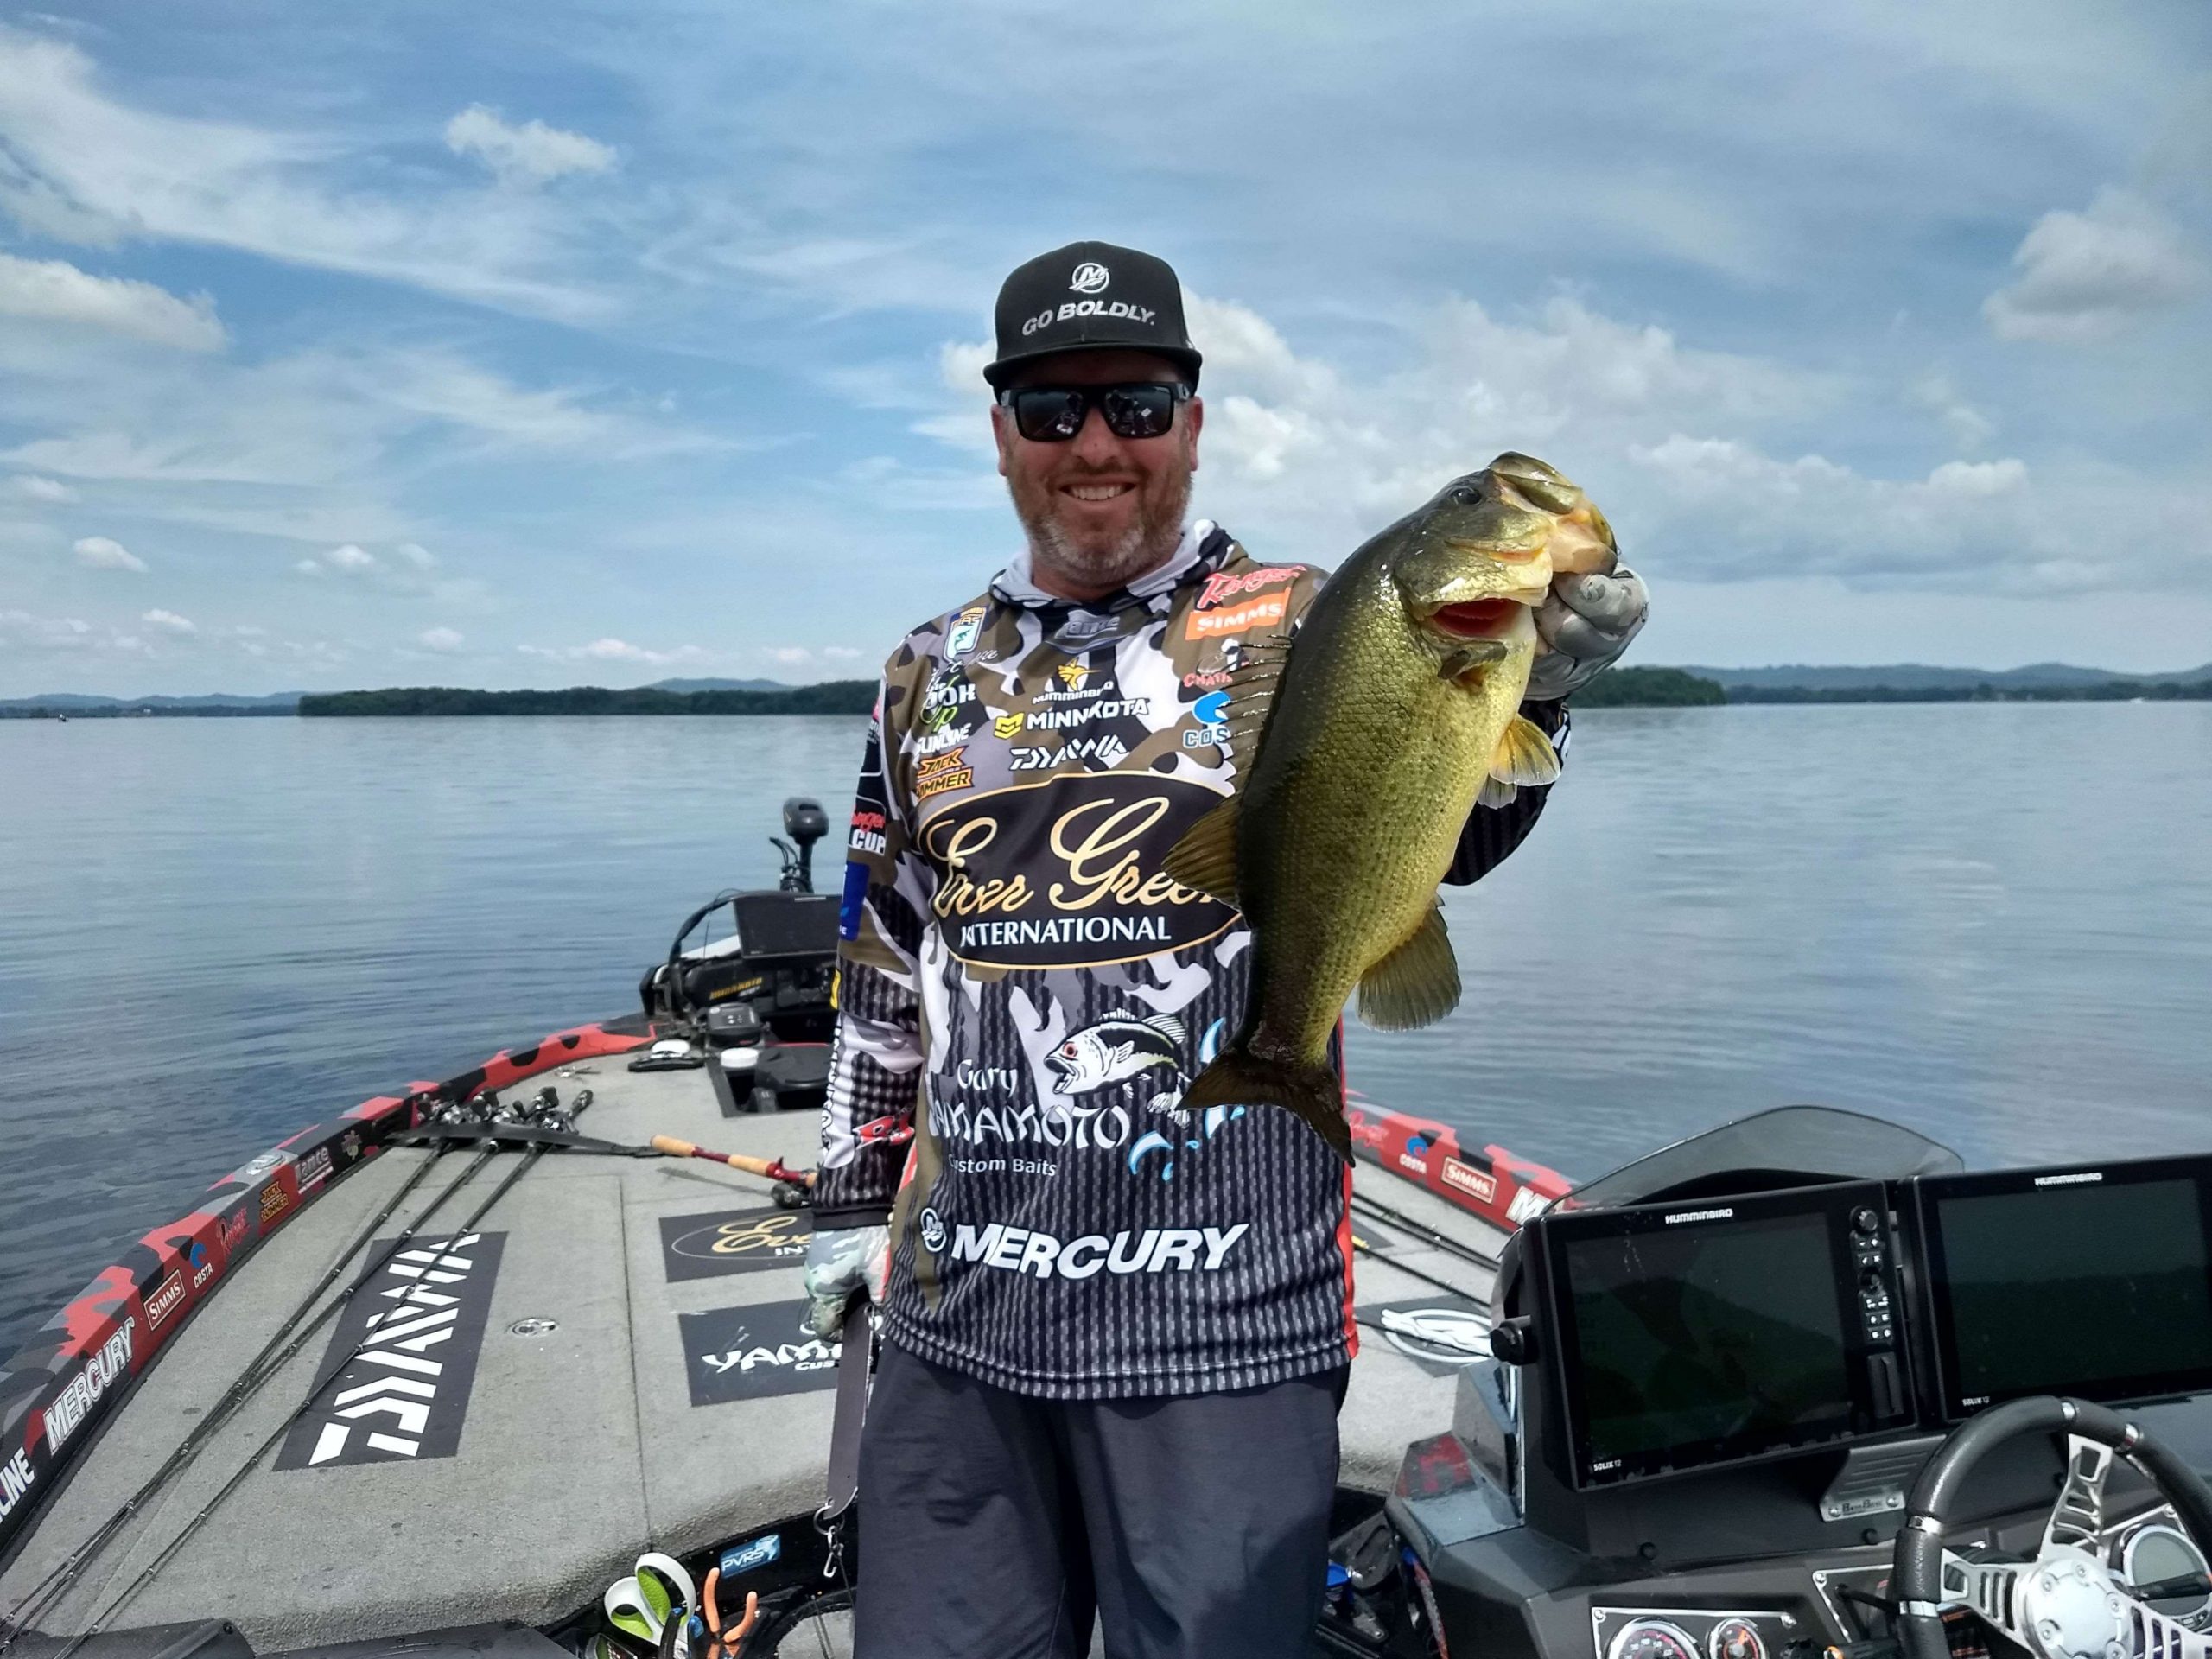 Brett Hite just landed a 3.5-pounder for an upgrade making his total now over 15-pounds.